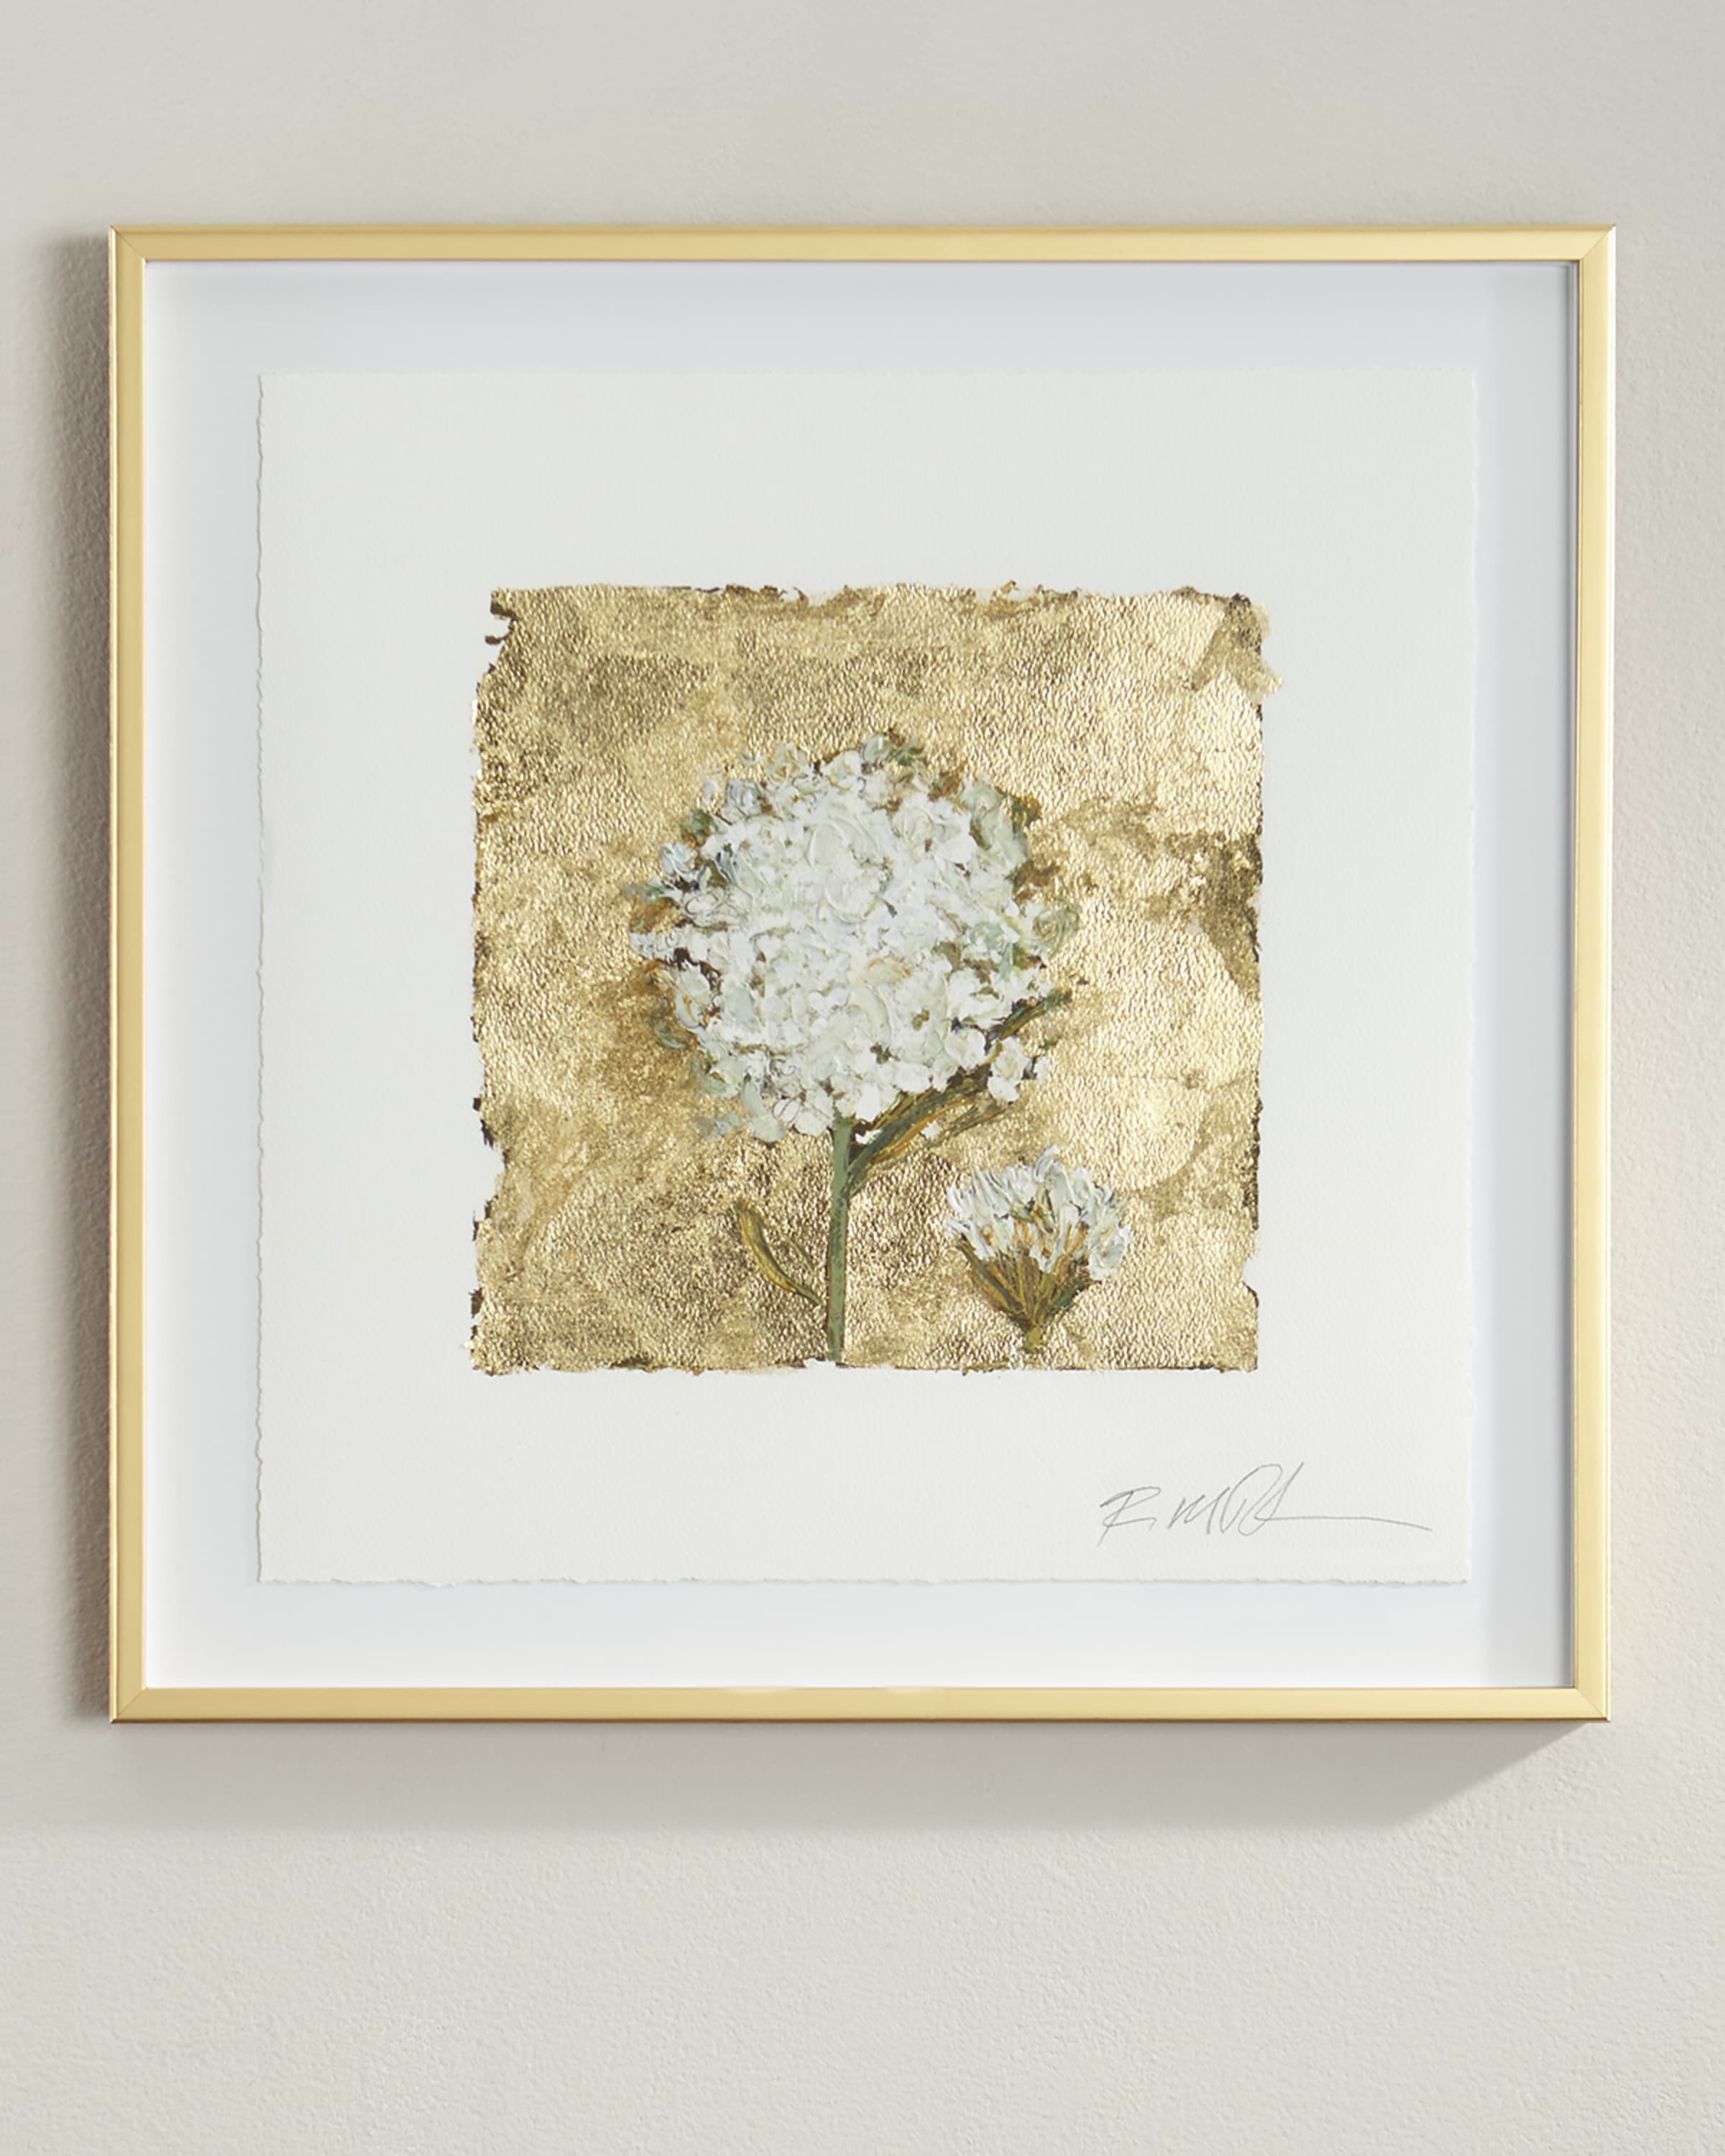 RFA Fine Art "Gold and Lace" Giclee on Paper Wall Art